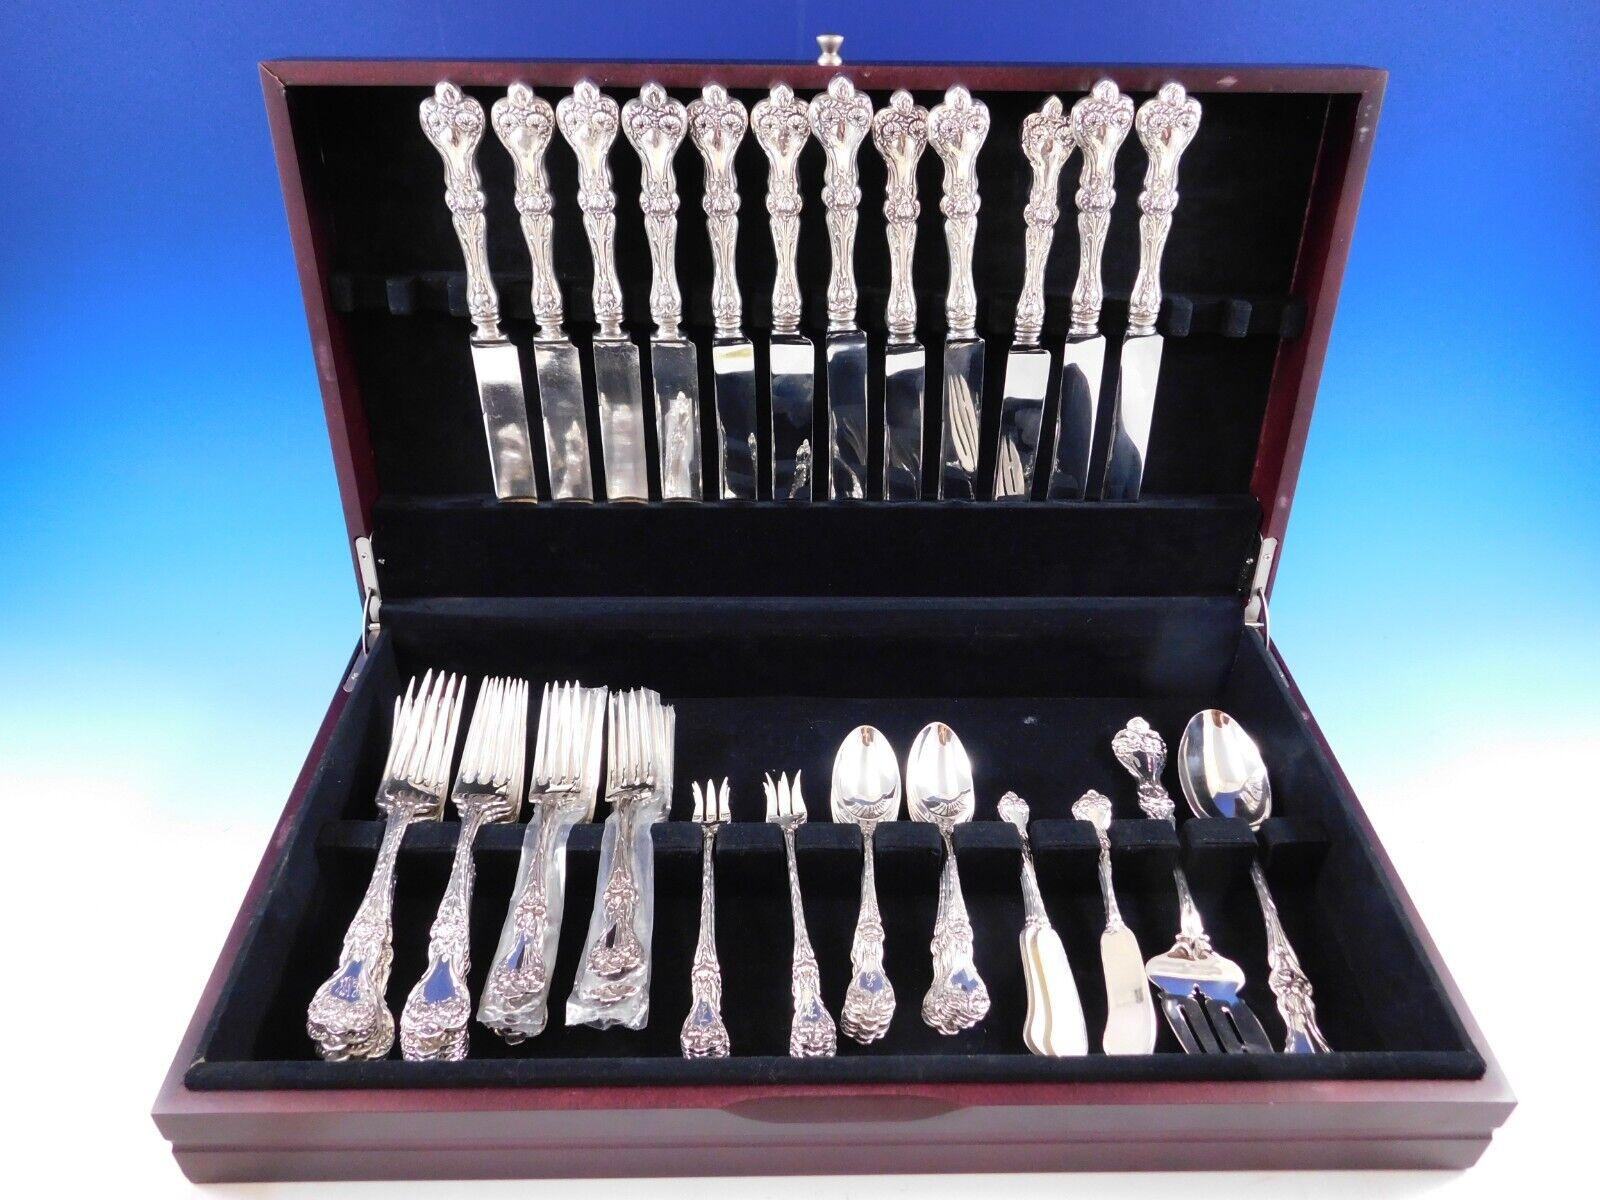 Rare multi-motif floral Majestic by Alvin circa 1900 sterling Silver flatware set - 74 pieces. This set includes:

12 Dinner Size Knives, 9 7/8